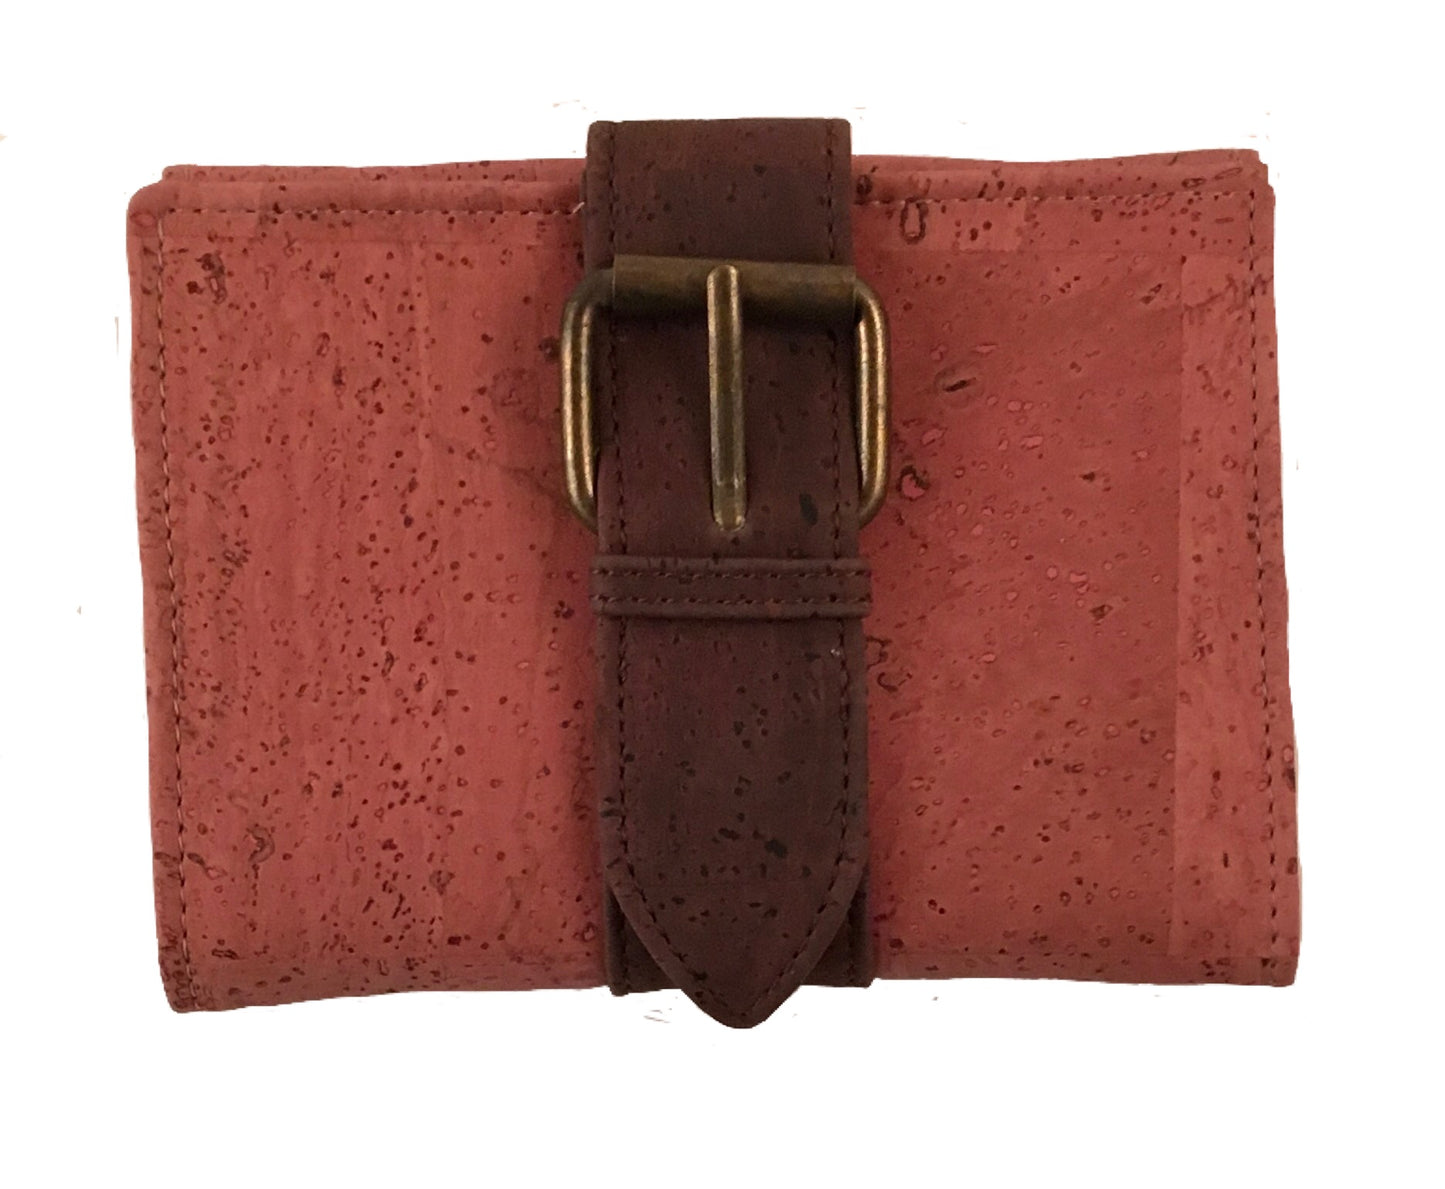 Art For The Cure Cork Belt Buckle Wallet | HowCork - The Cork Marketplace